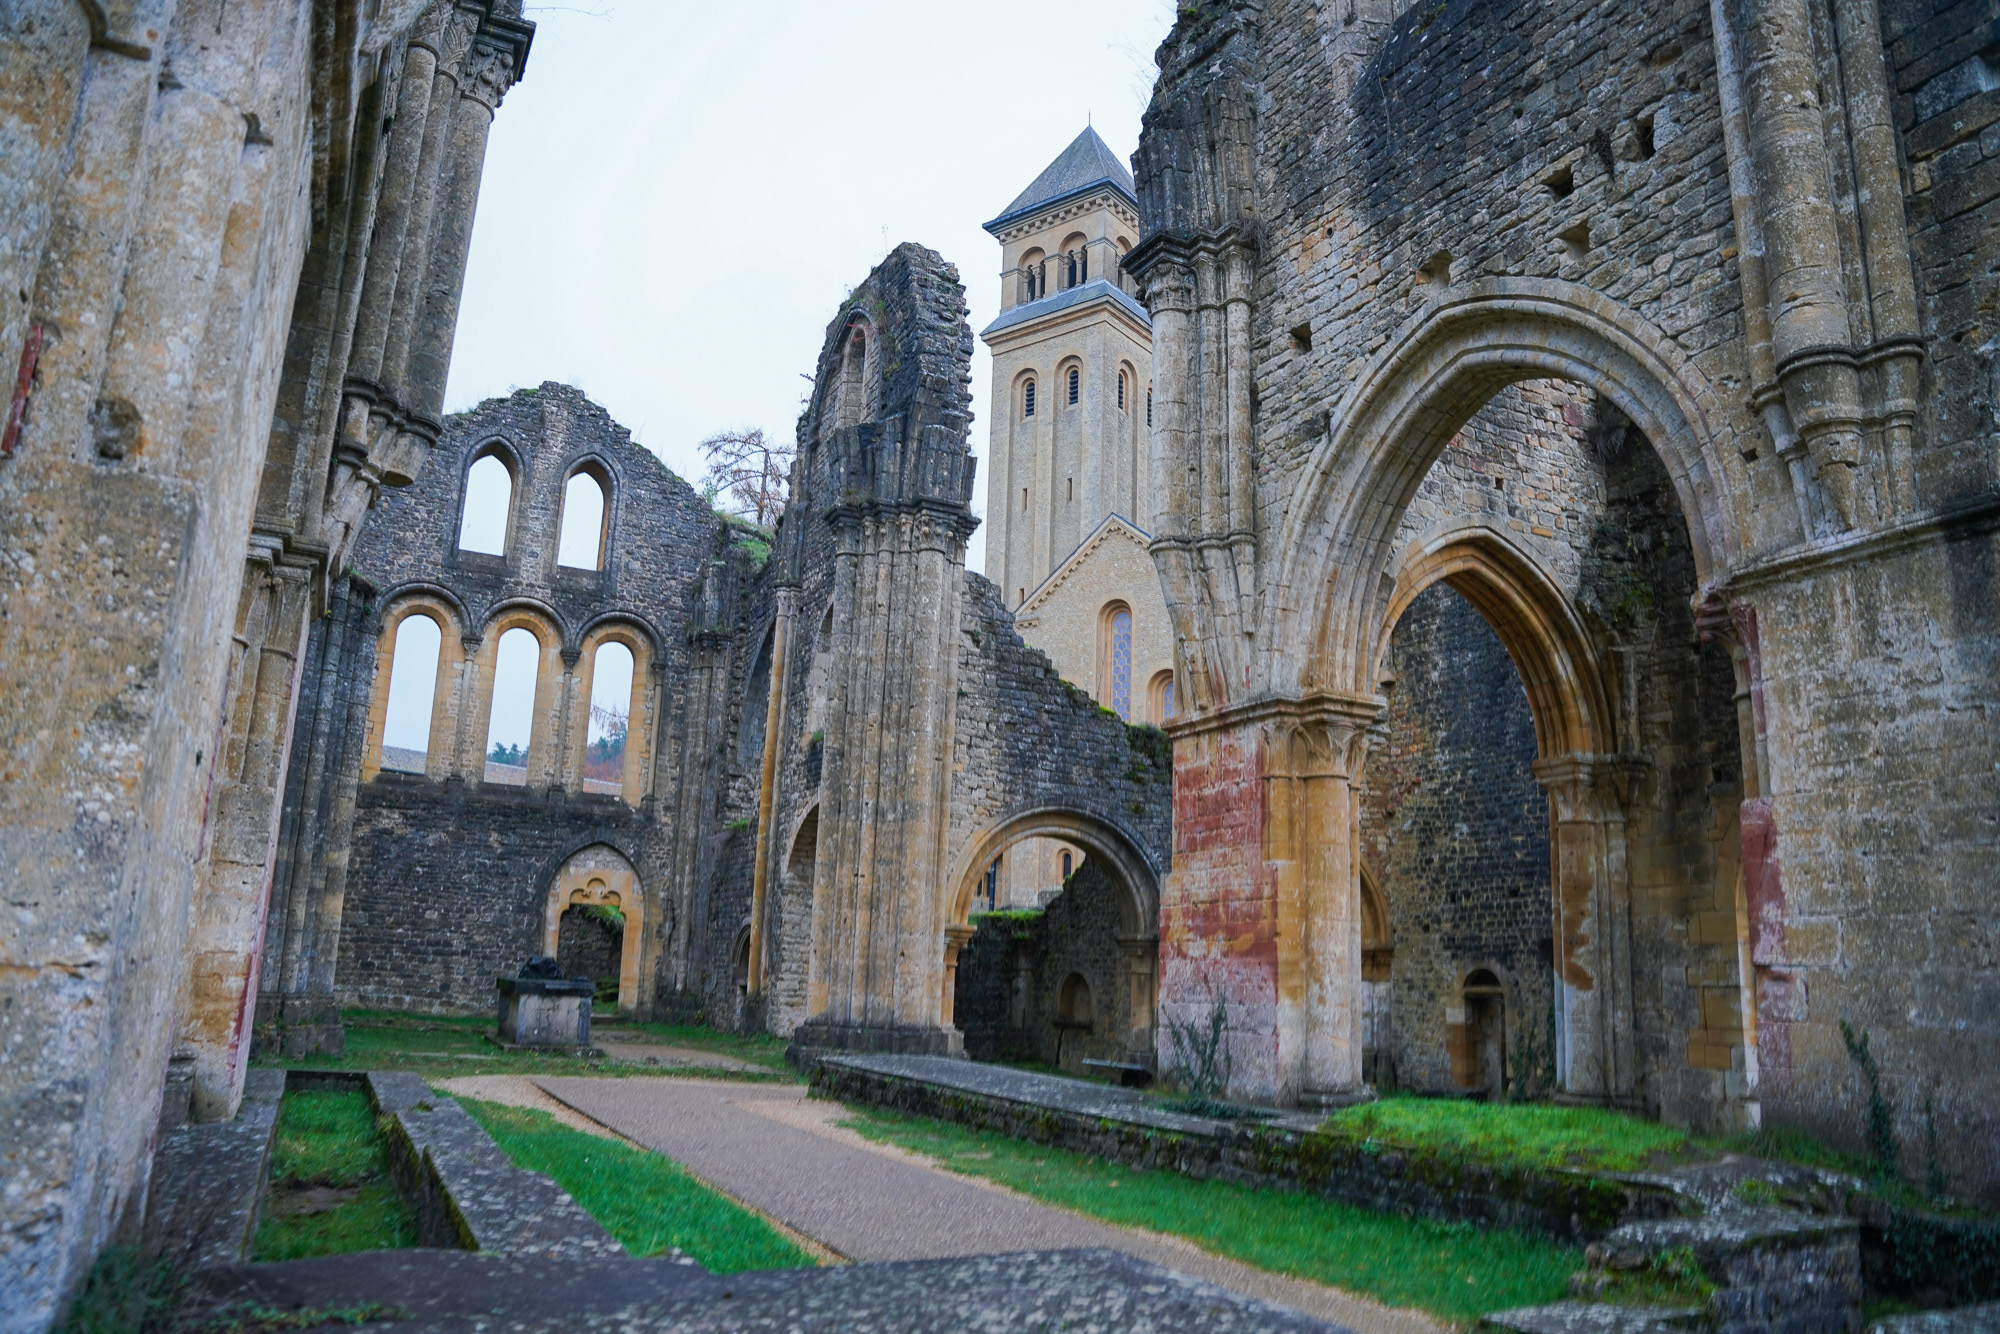 Ruins at Orval Abbey